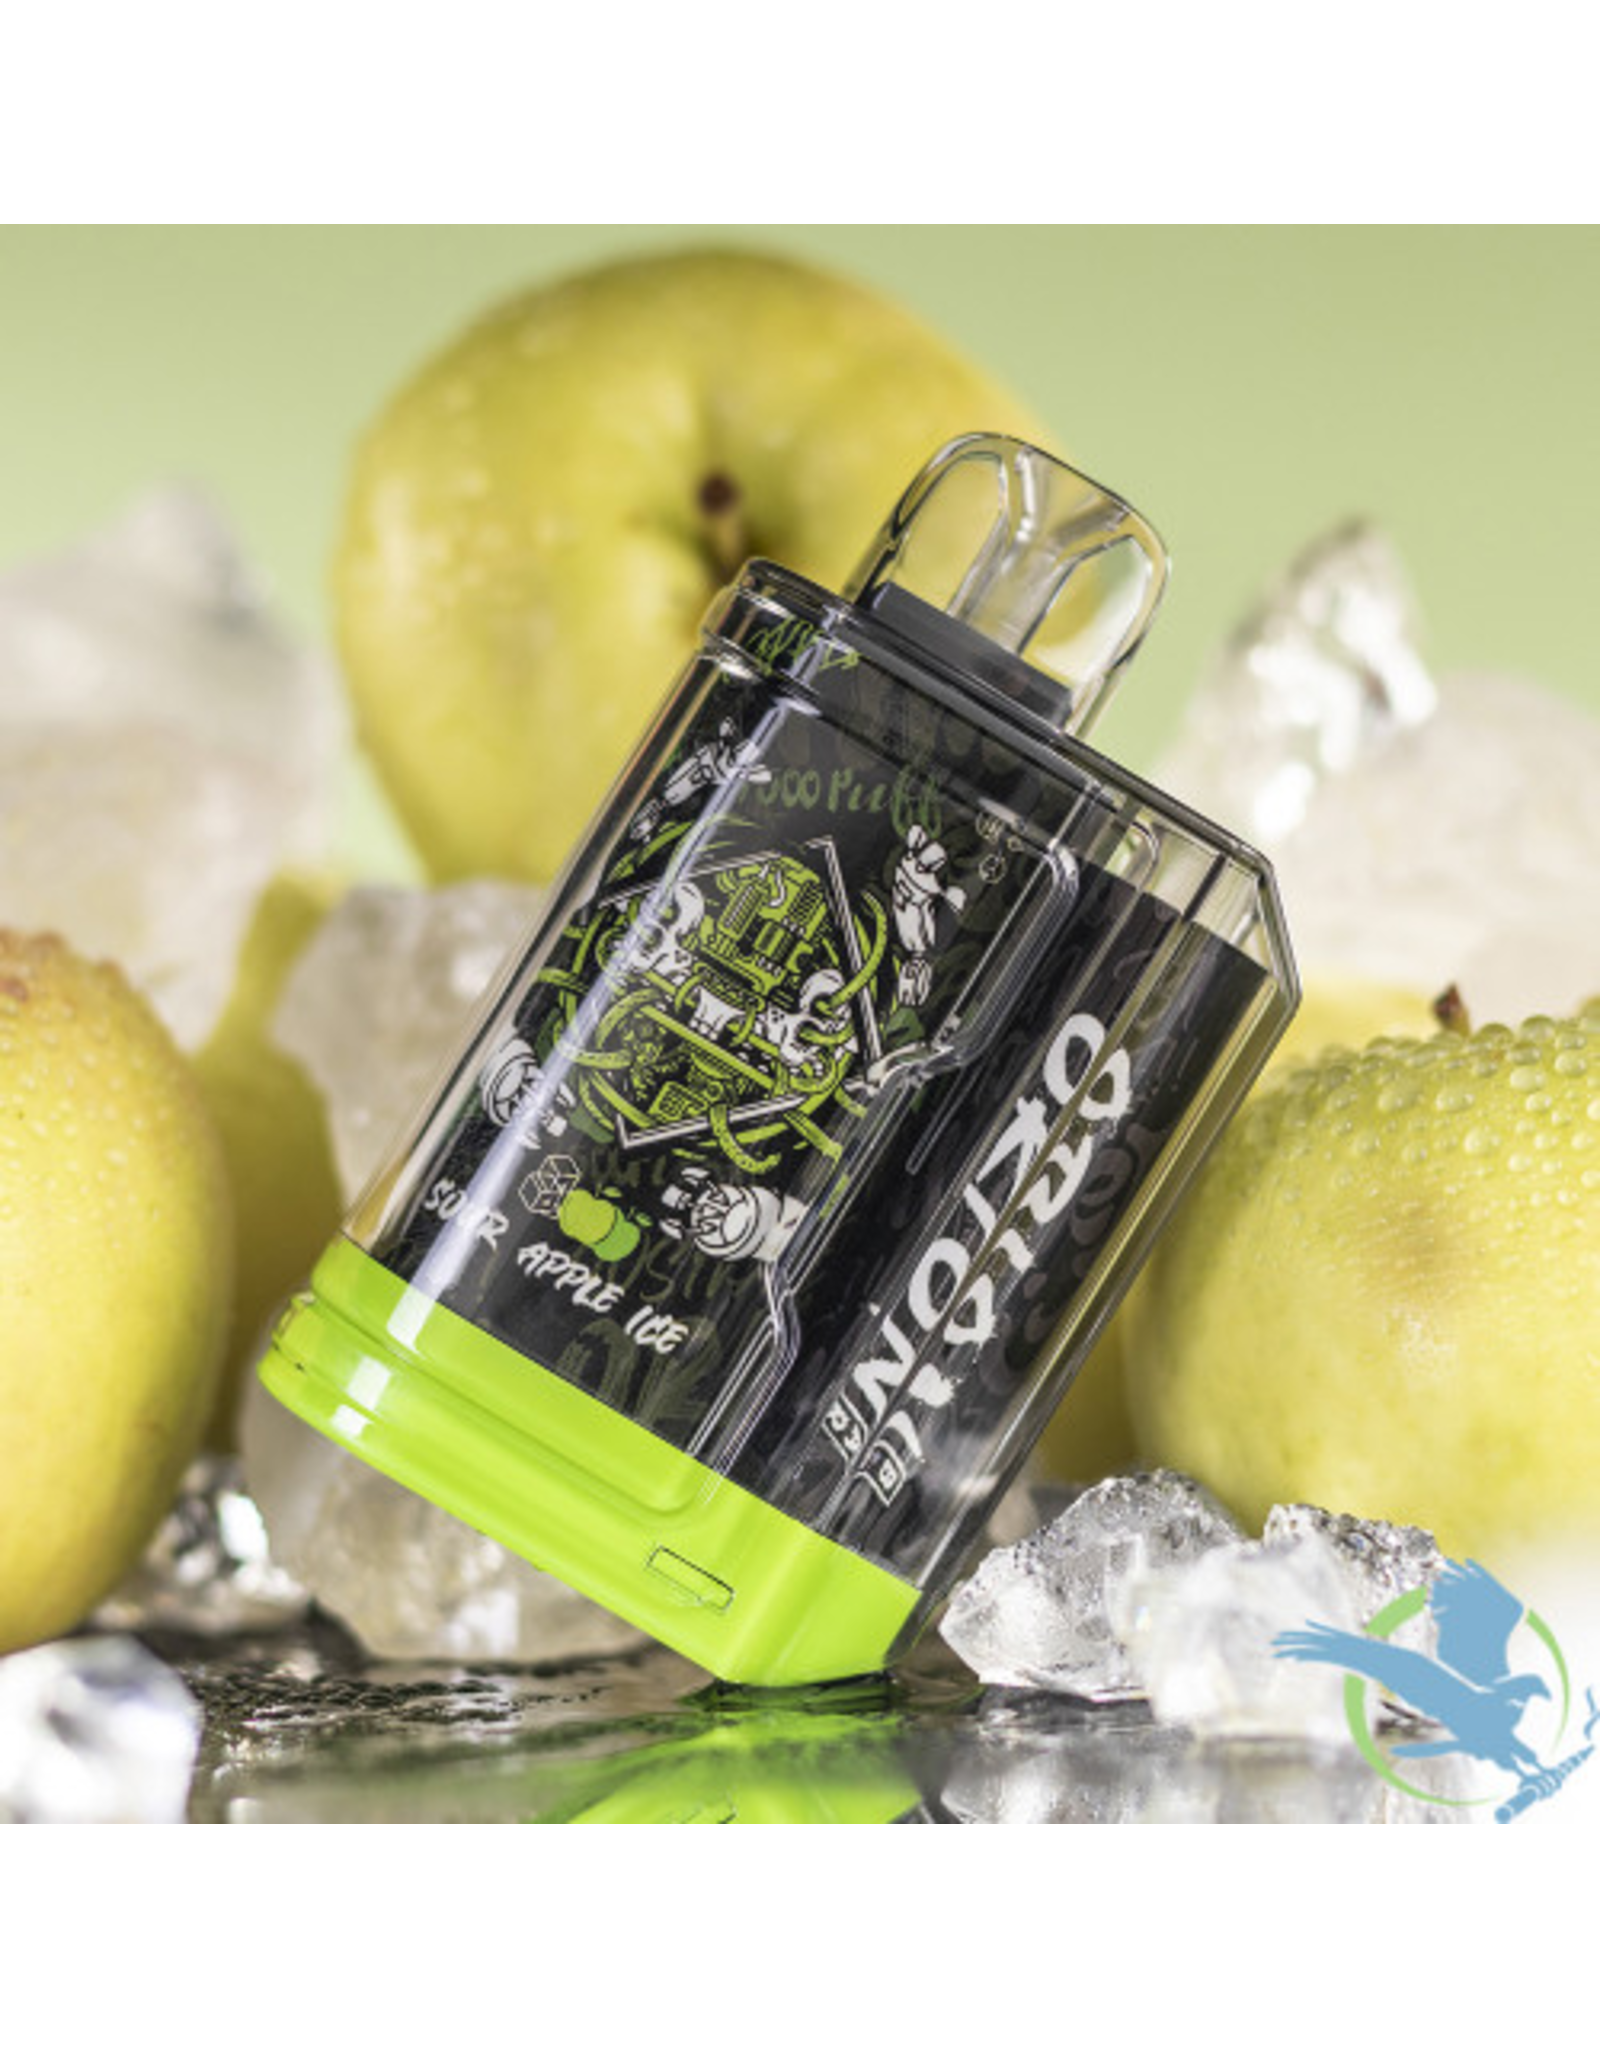 Orion Bar 7500 Puff - Sour Apple Ice